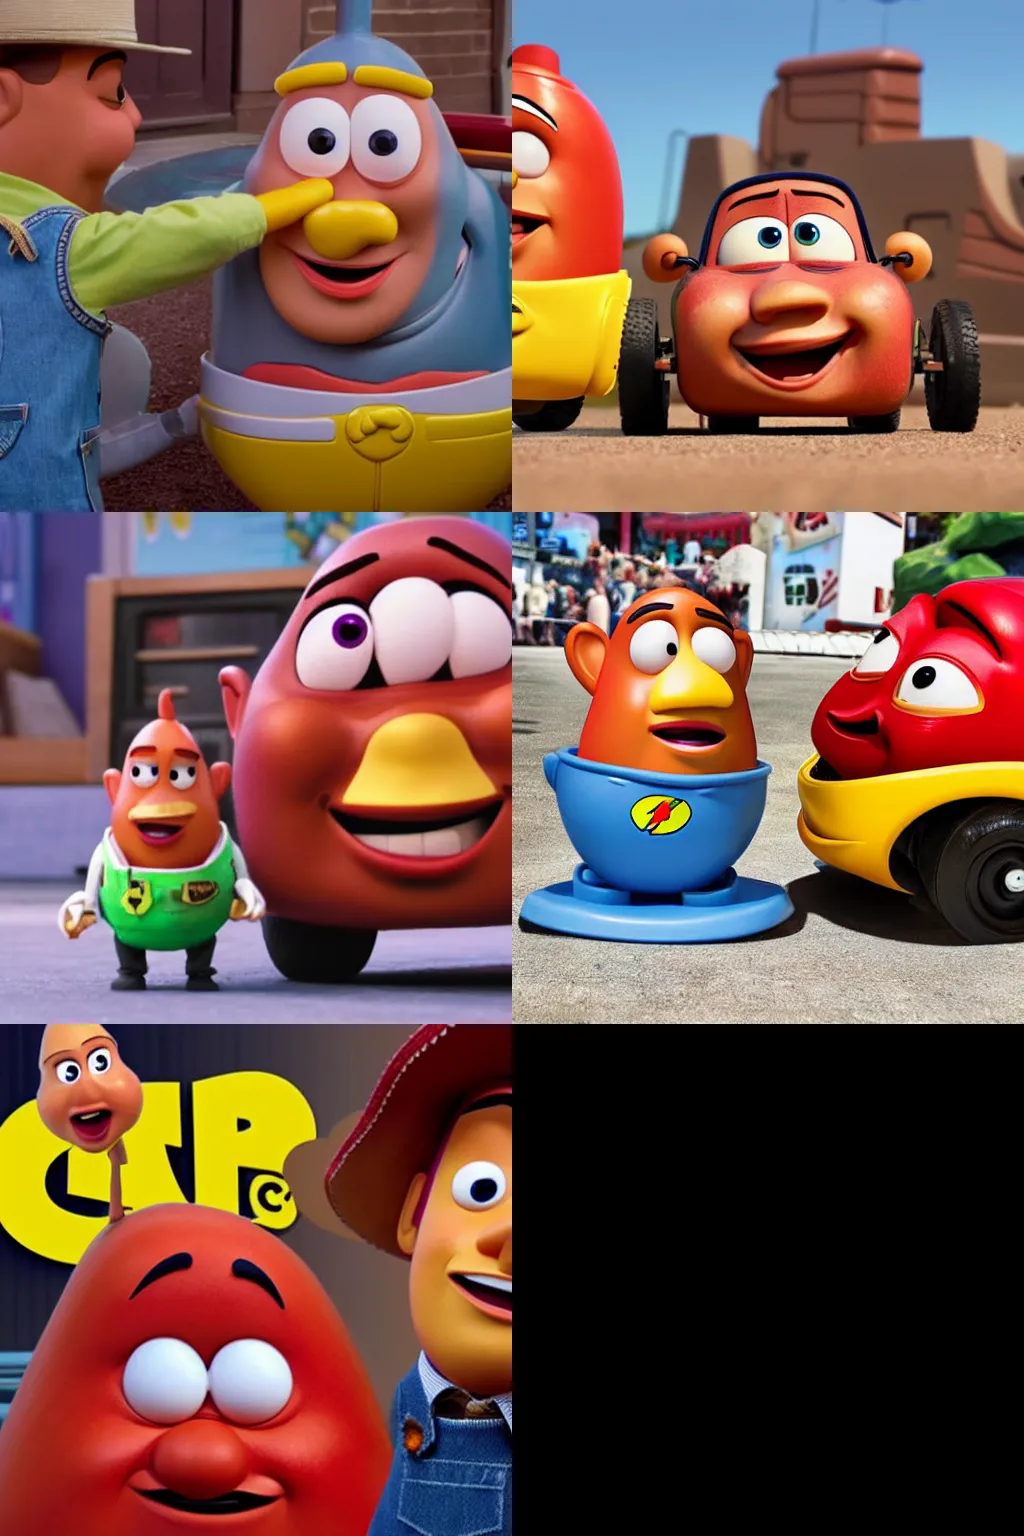 mister potato head from the toy story 4 movie in 2019, Stable Diffusion